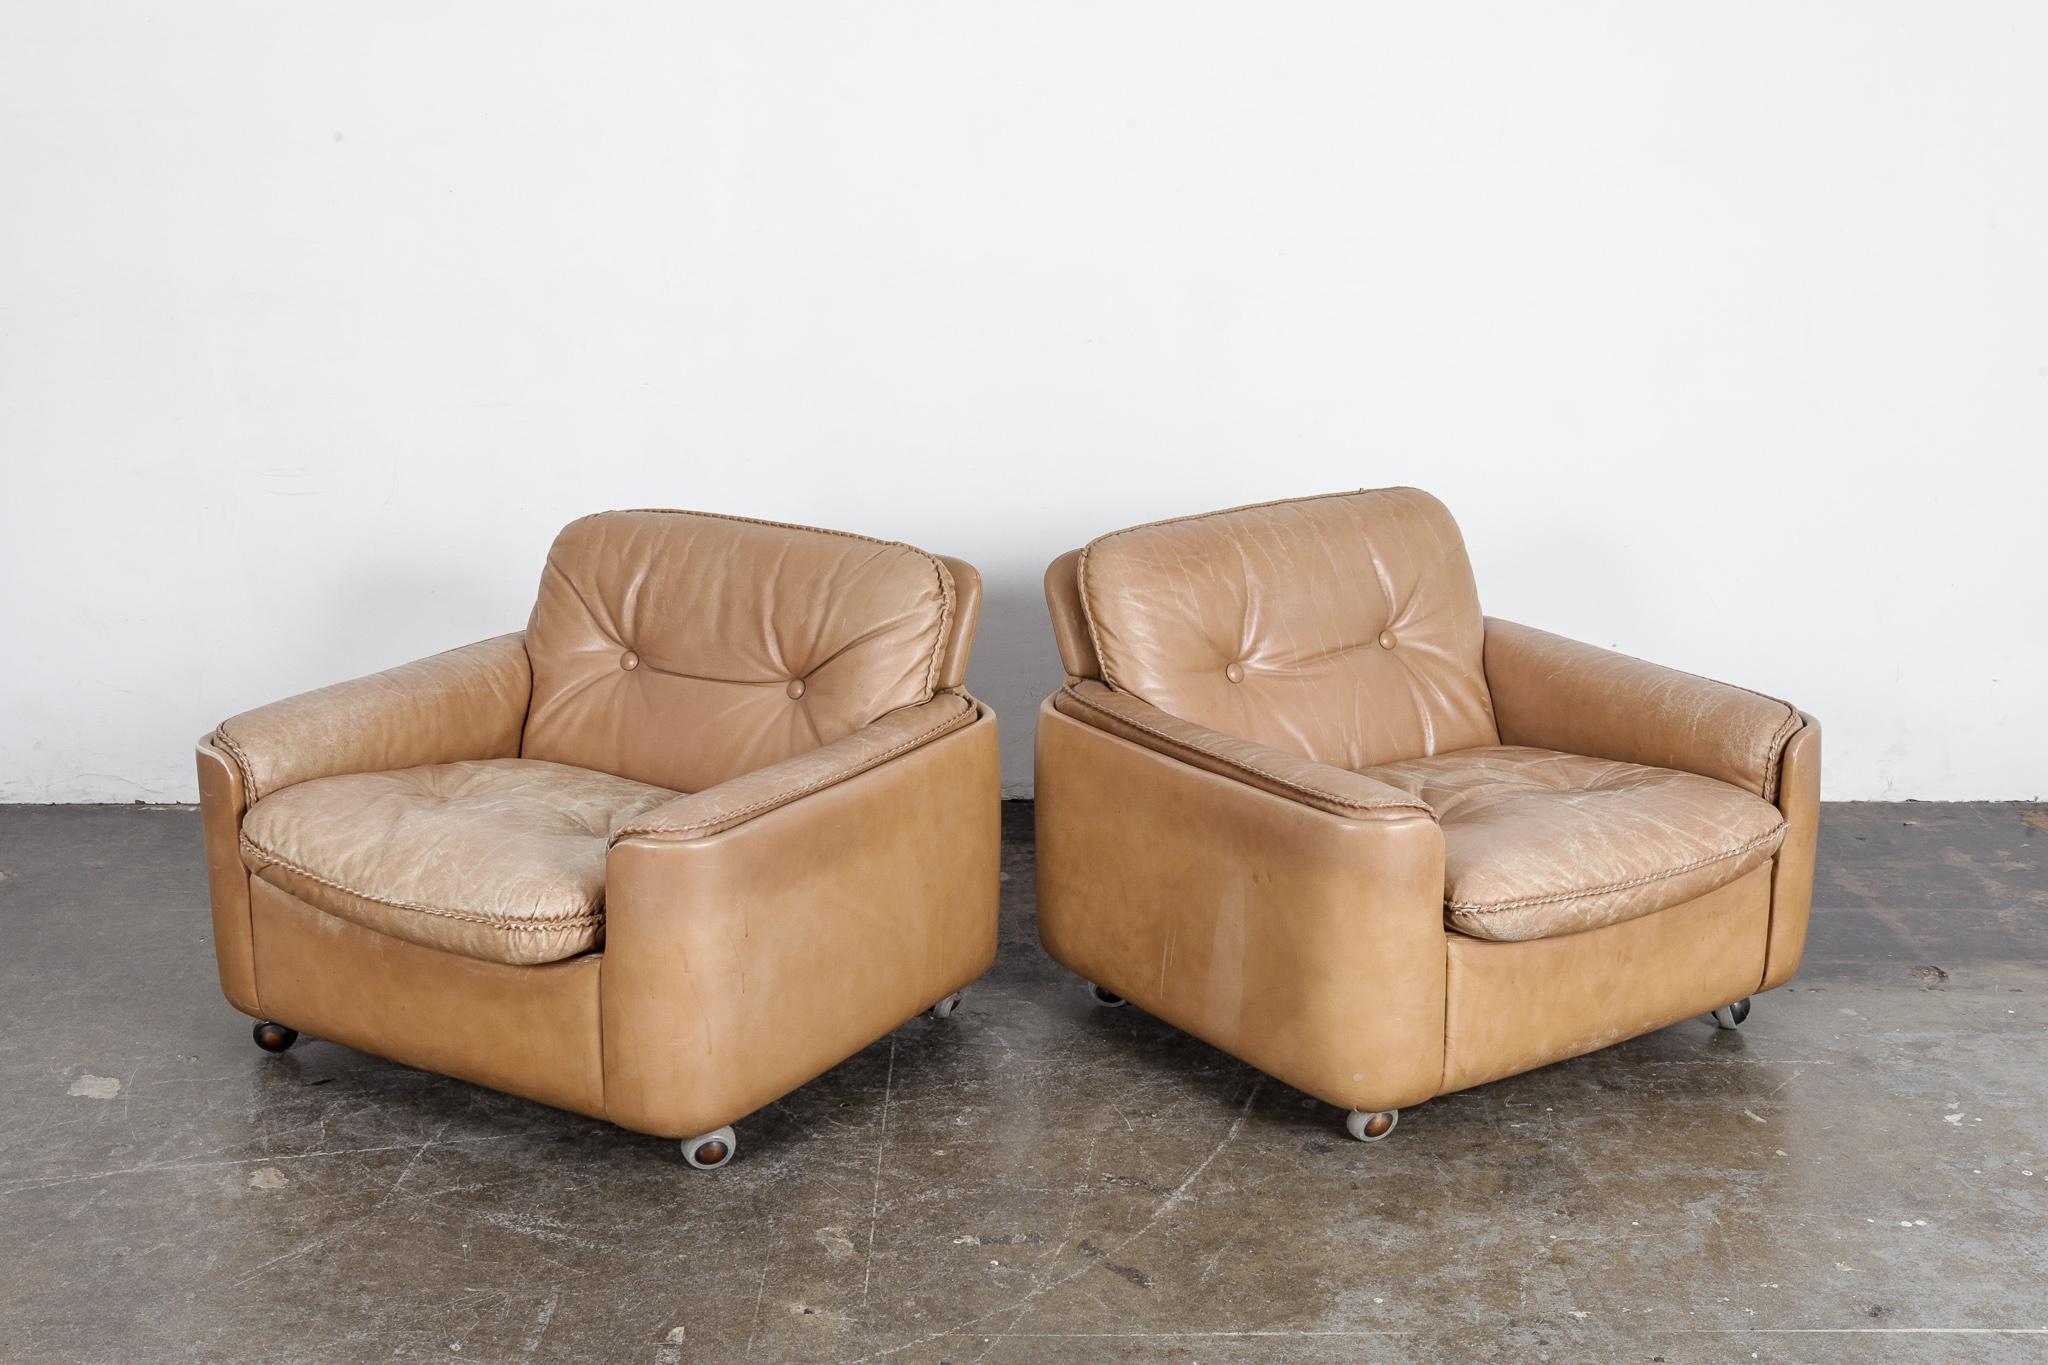 Pair of low lounge chairs in original tan leather with baseball seam stitching, sitting on 4 casters with button tufted backs and seats. Designed by Sigurd Ressell for Vatne Mobler, 1960s. Beautiful patina on both chairs by no tears or gouges.